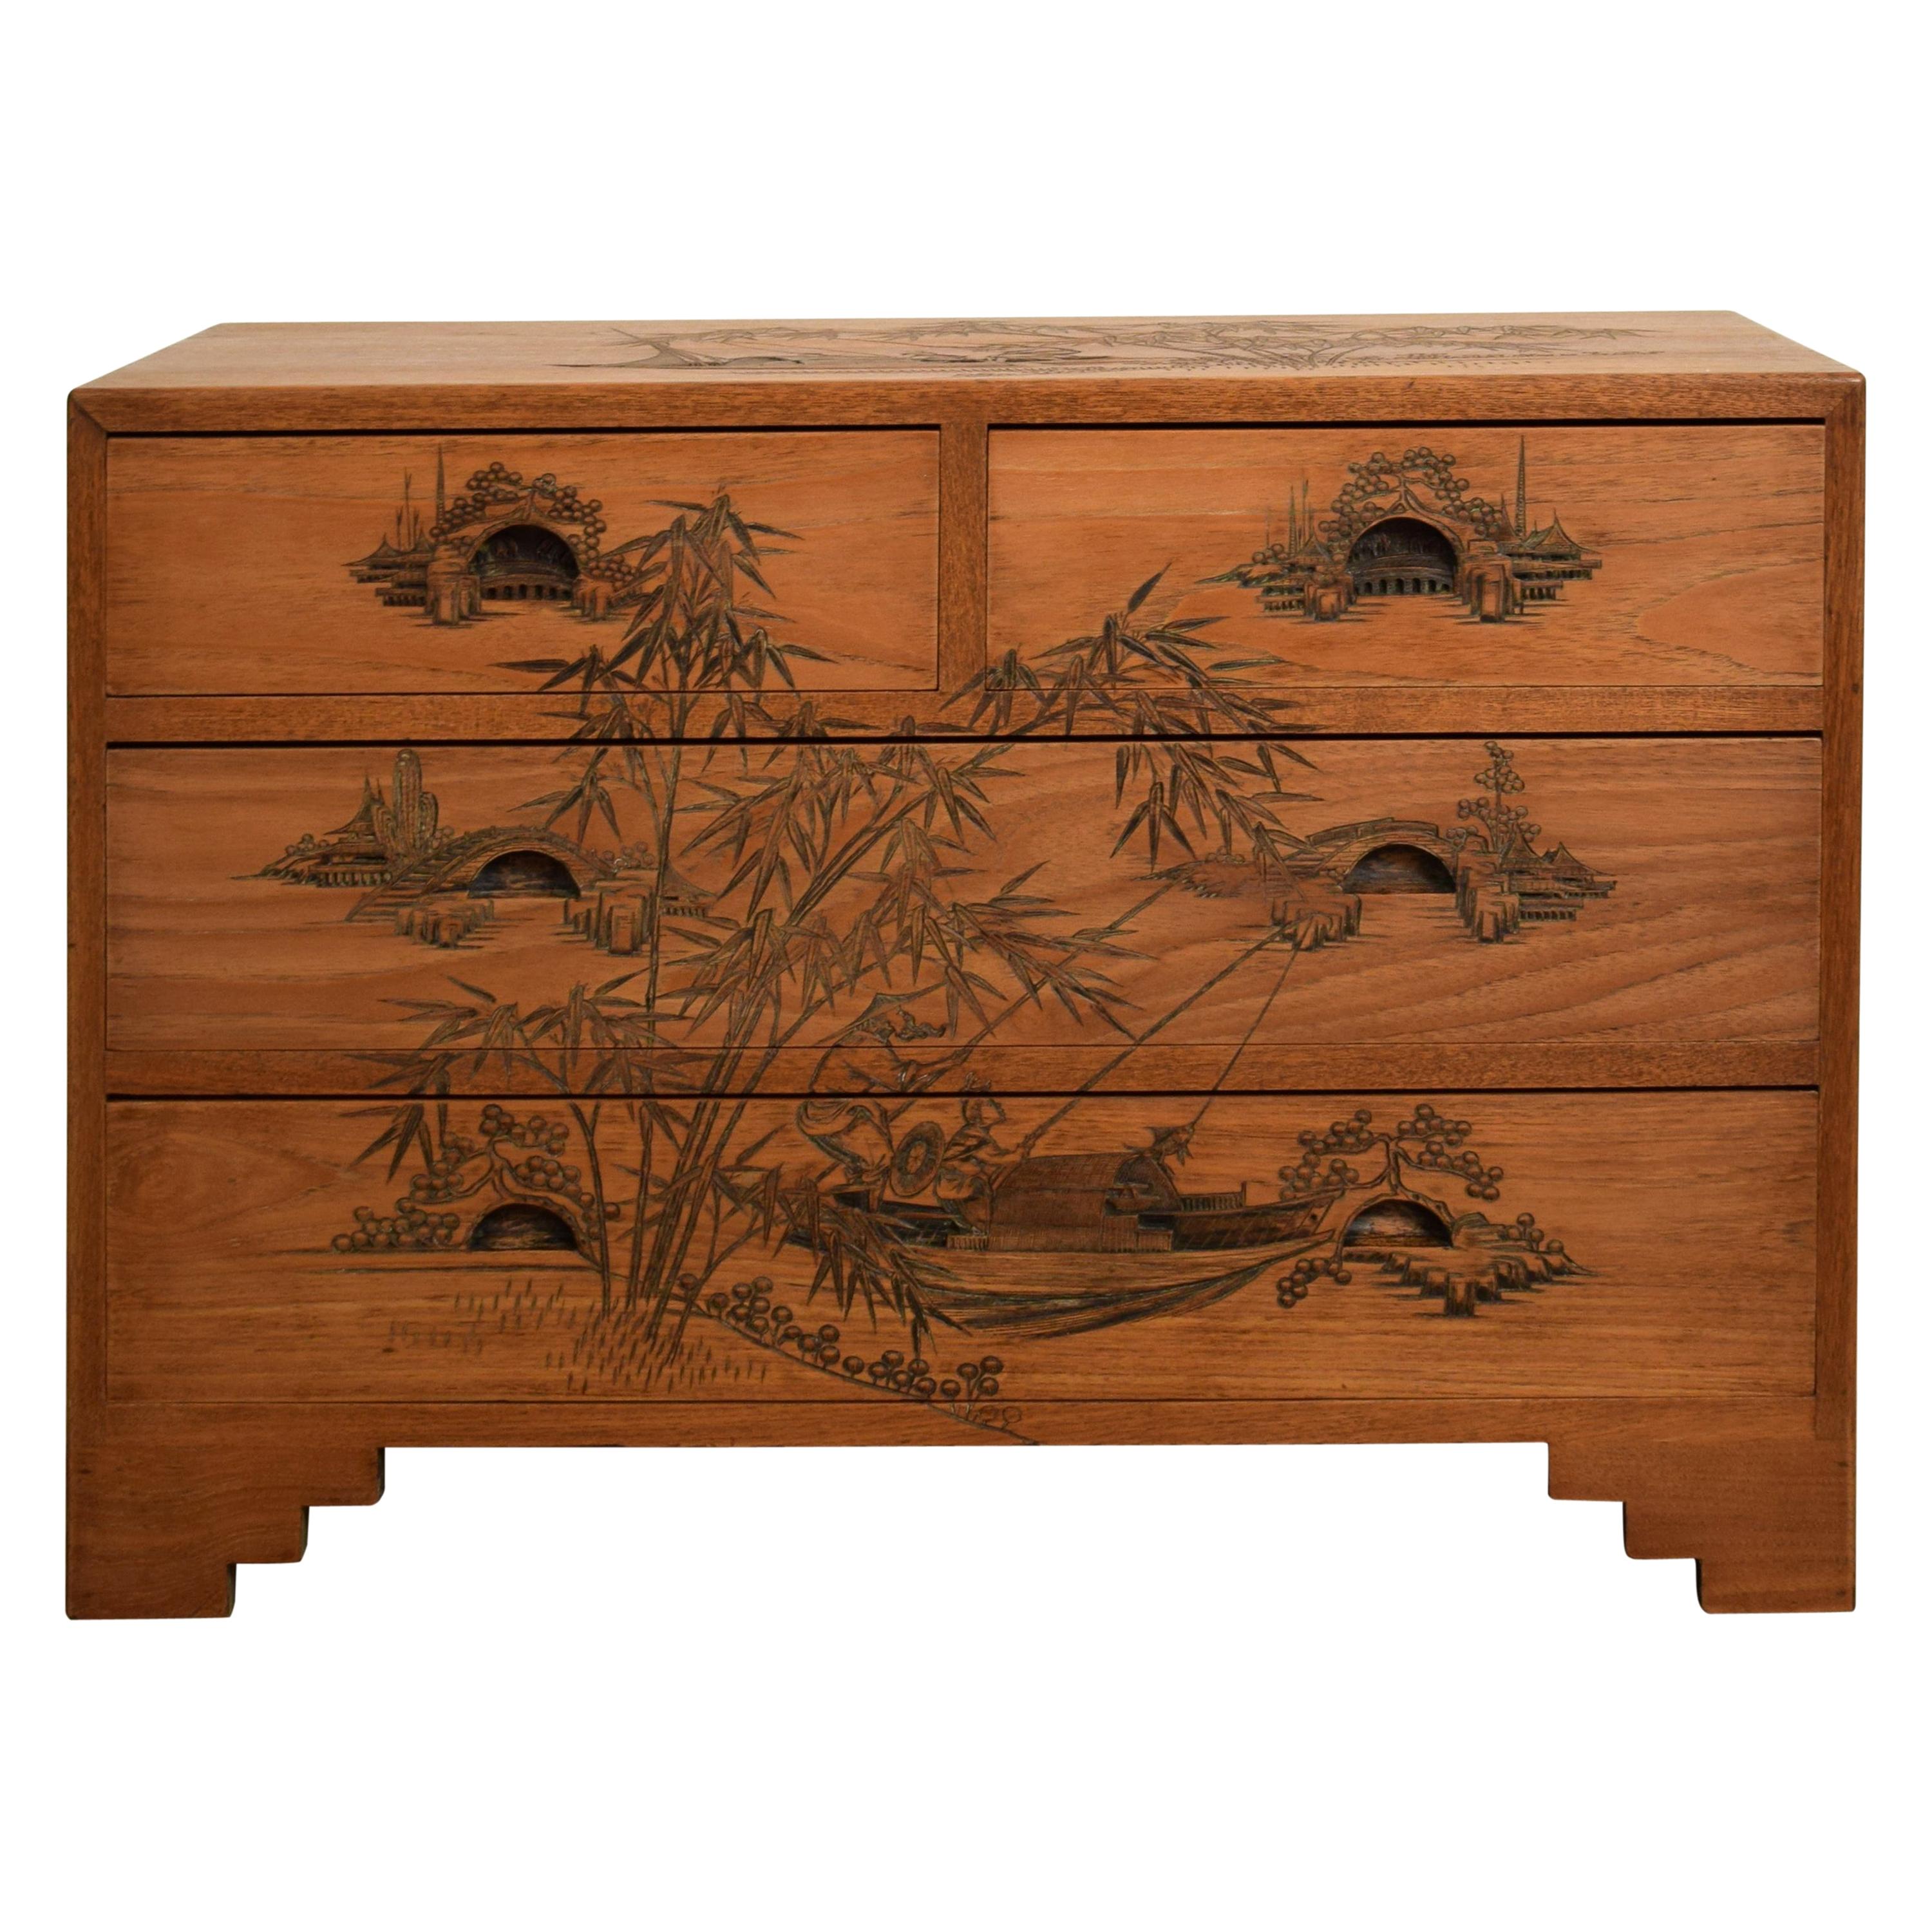 Carved German Colonial Asian Brown Art Deco Chest of Drawers from the 1920s